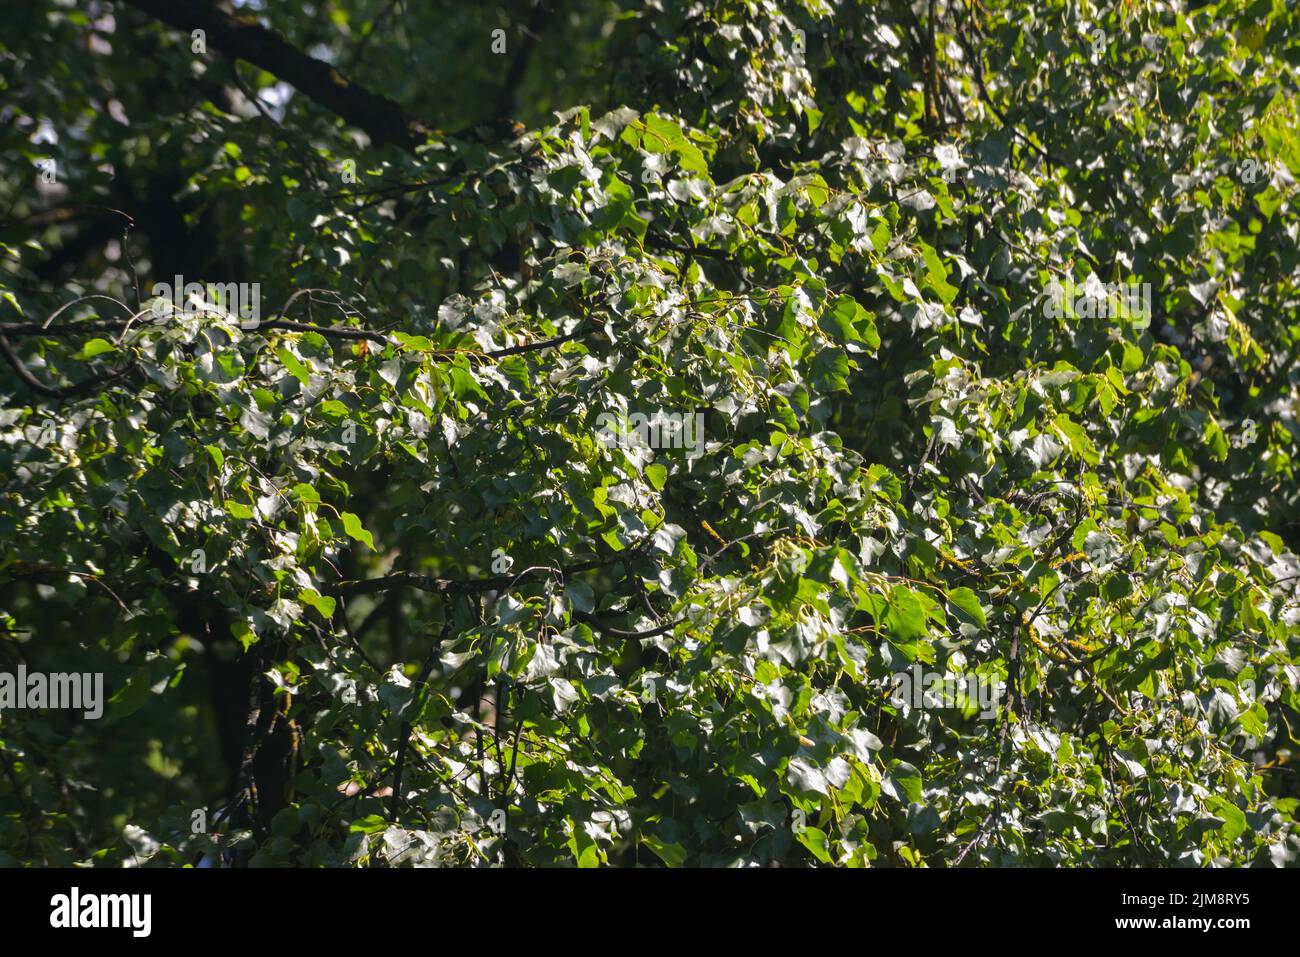 Close-up of green tree leaves. texture with green leaves of trees that are illuminated by the golden summer evening sun. Stock Photo